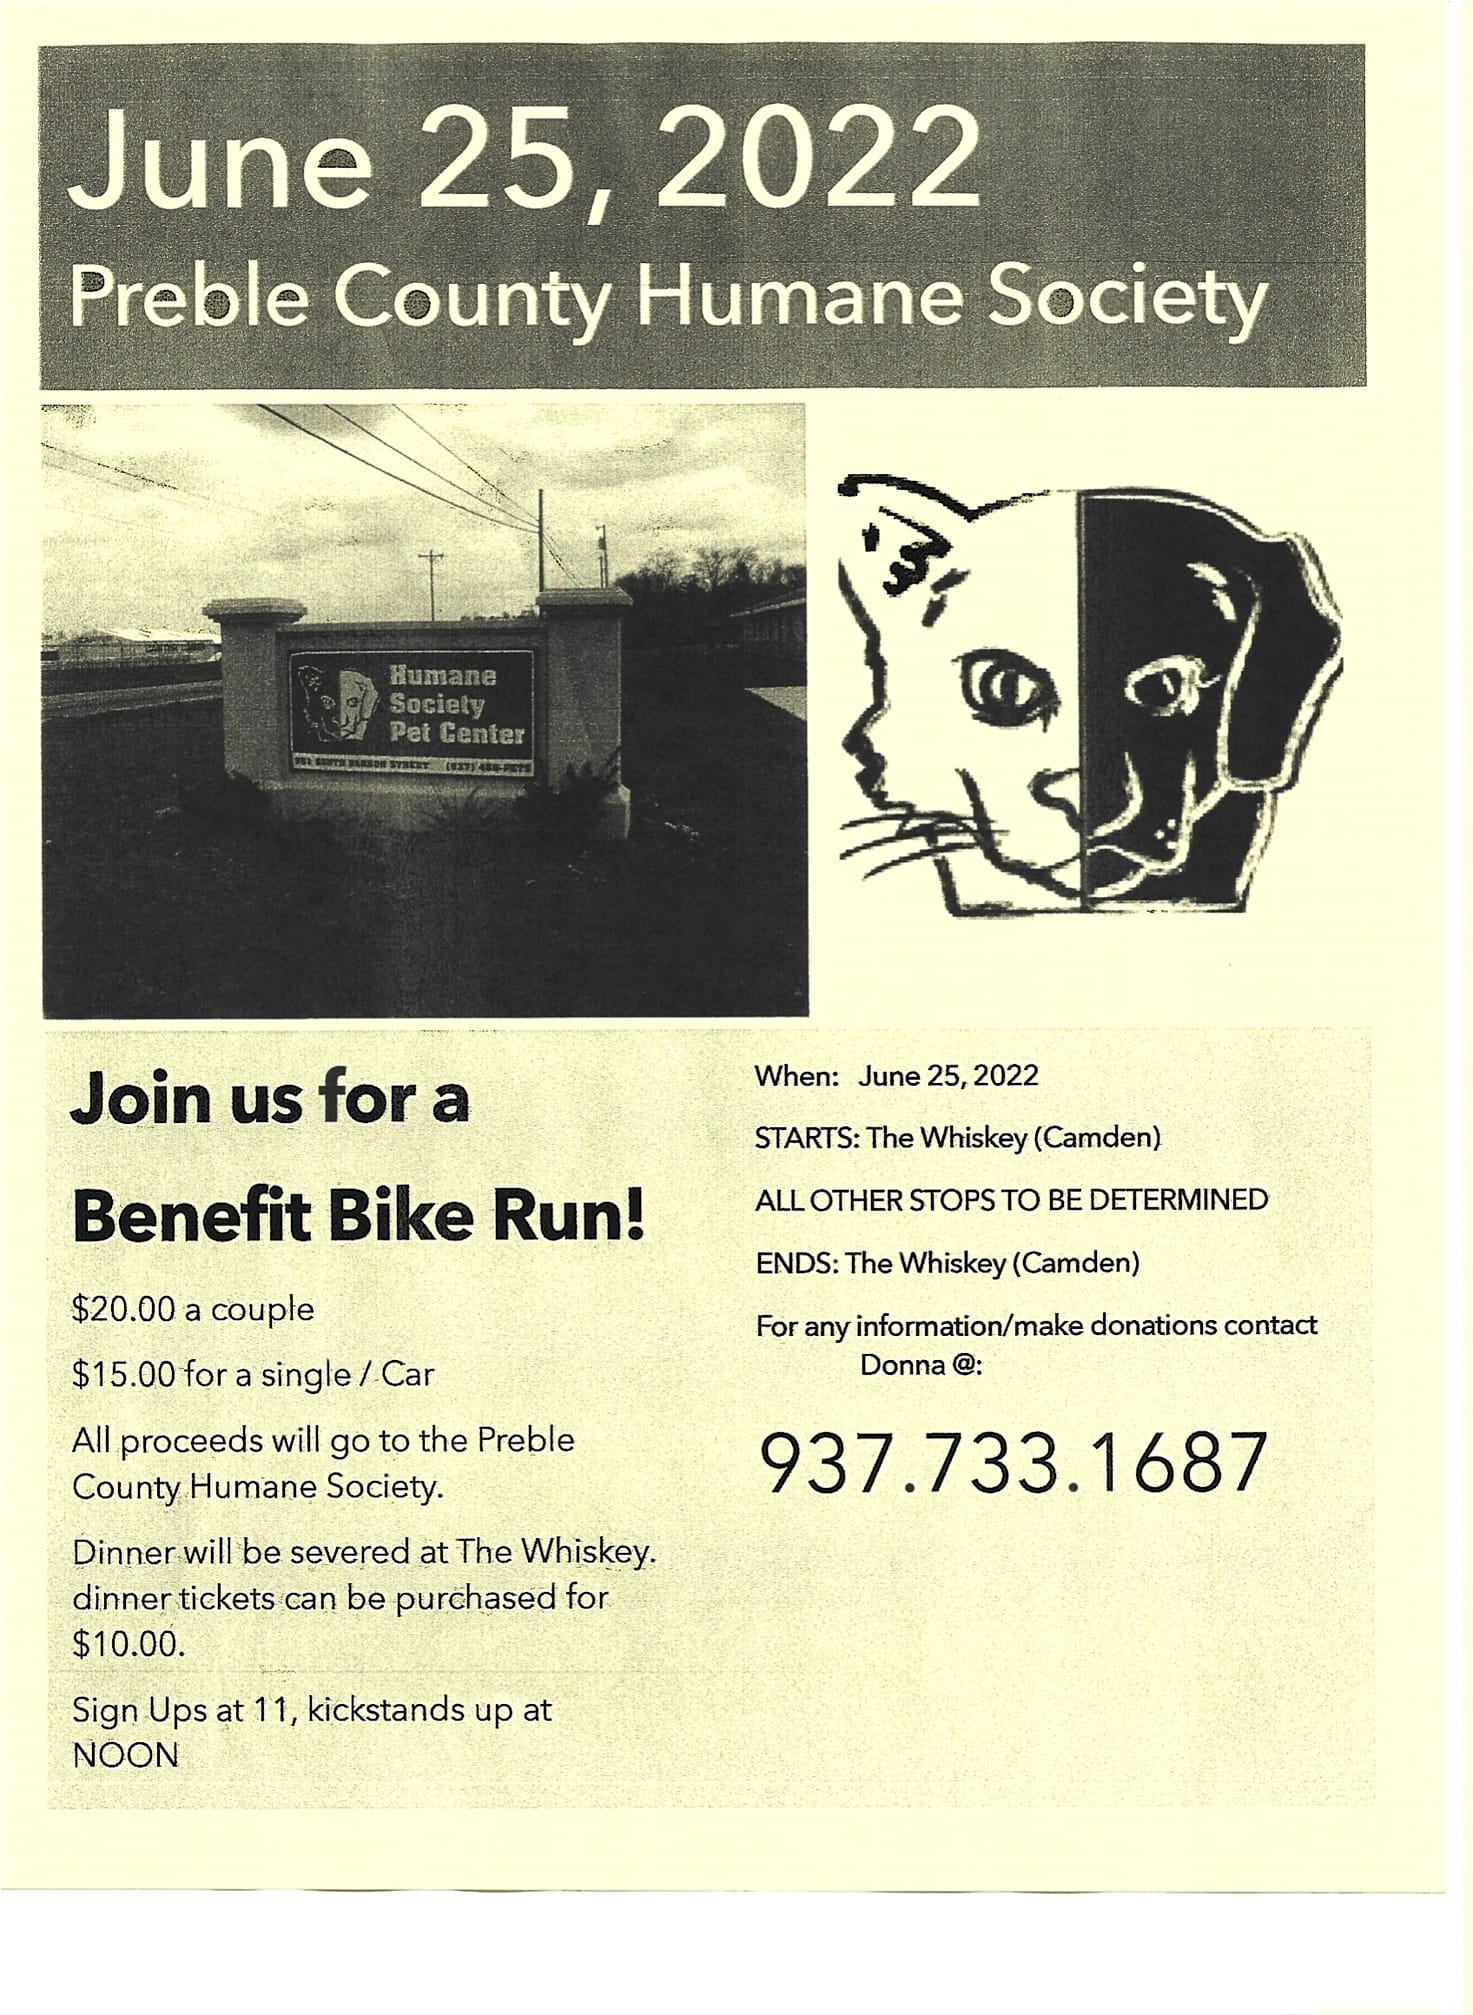 Benefit Bike Ride for Humane Society @ The Whiskey